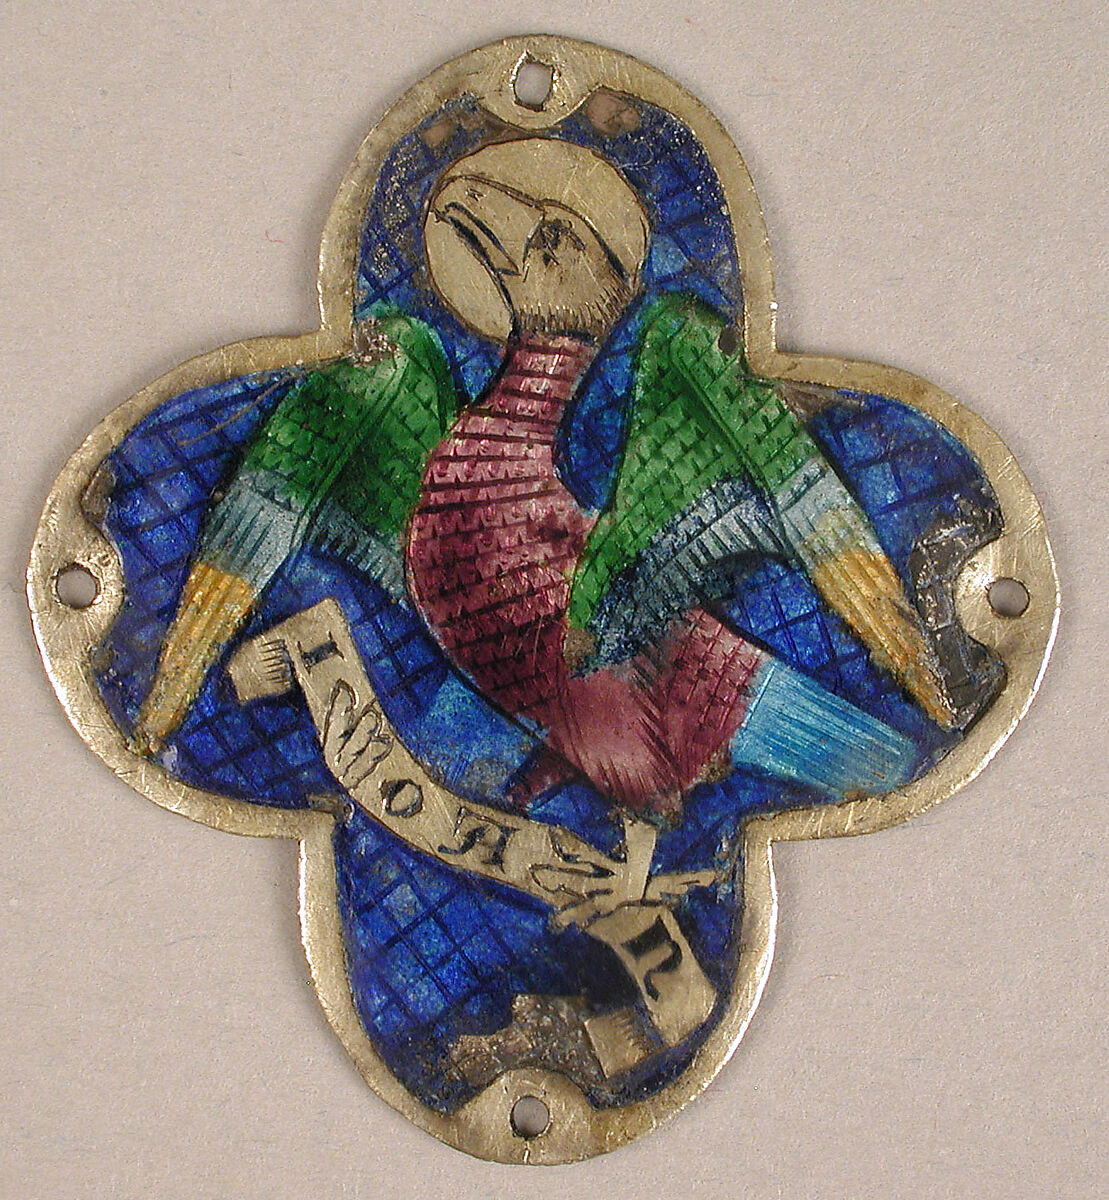 Plaque with the Eagle of Saint John, Basse taille enamel, silver, Catalan 